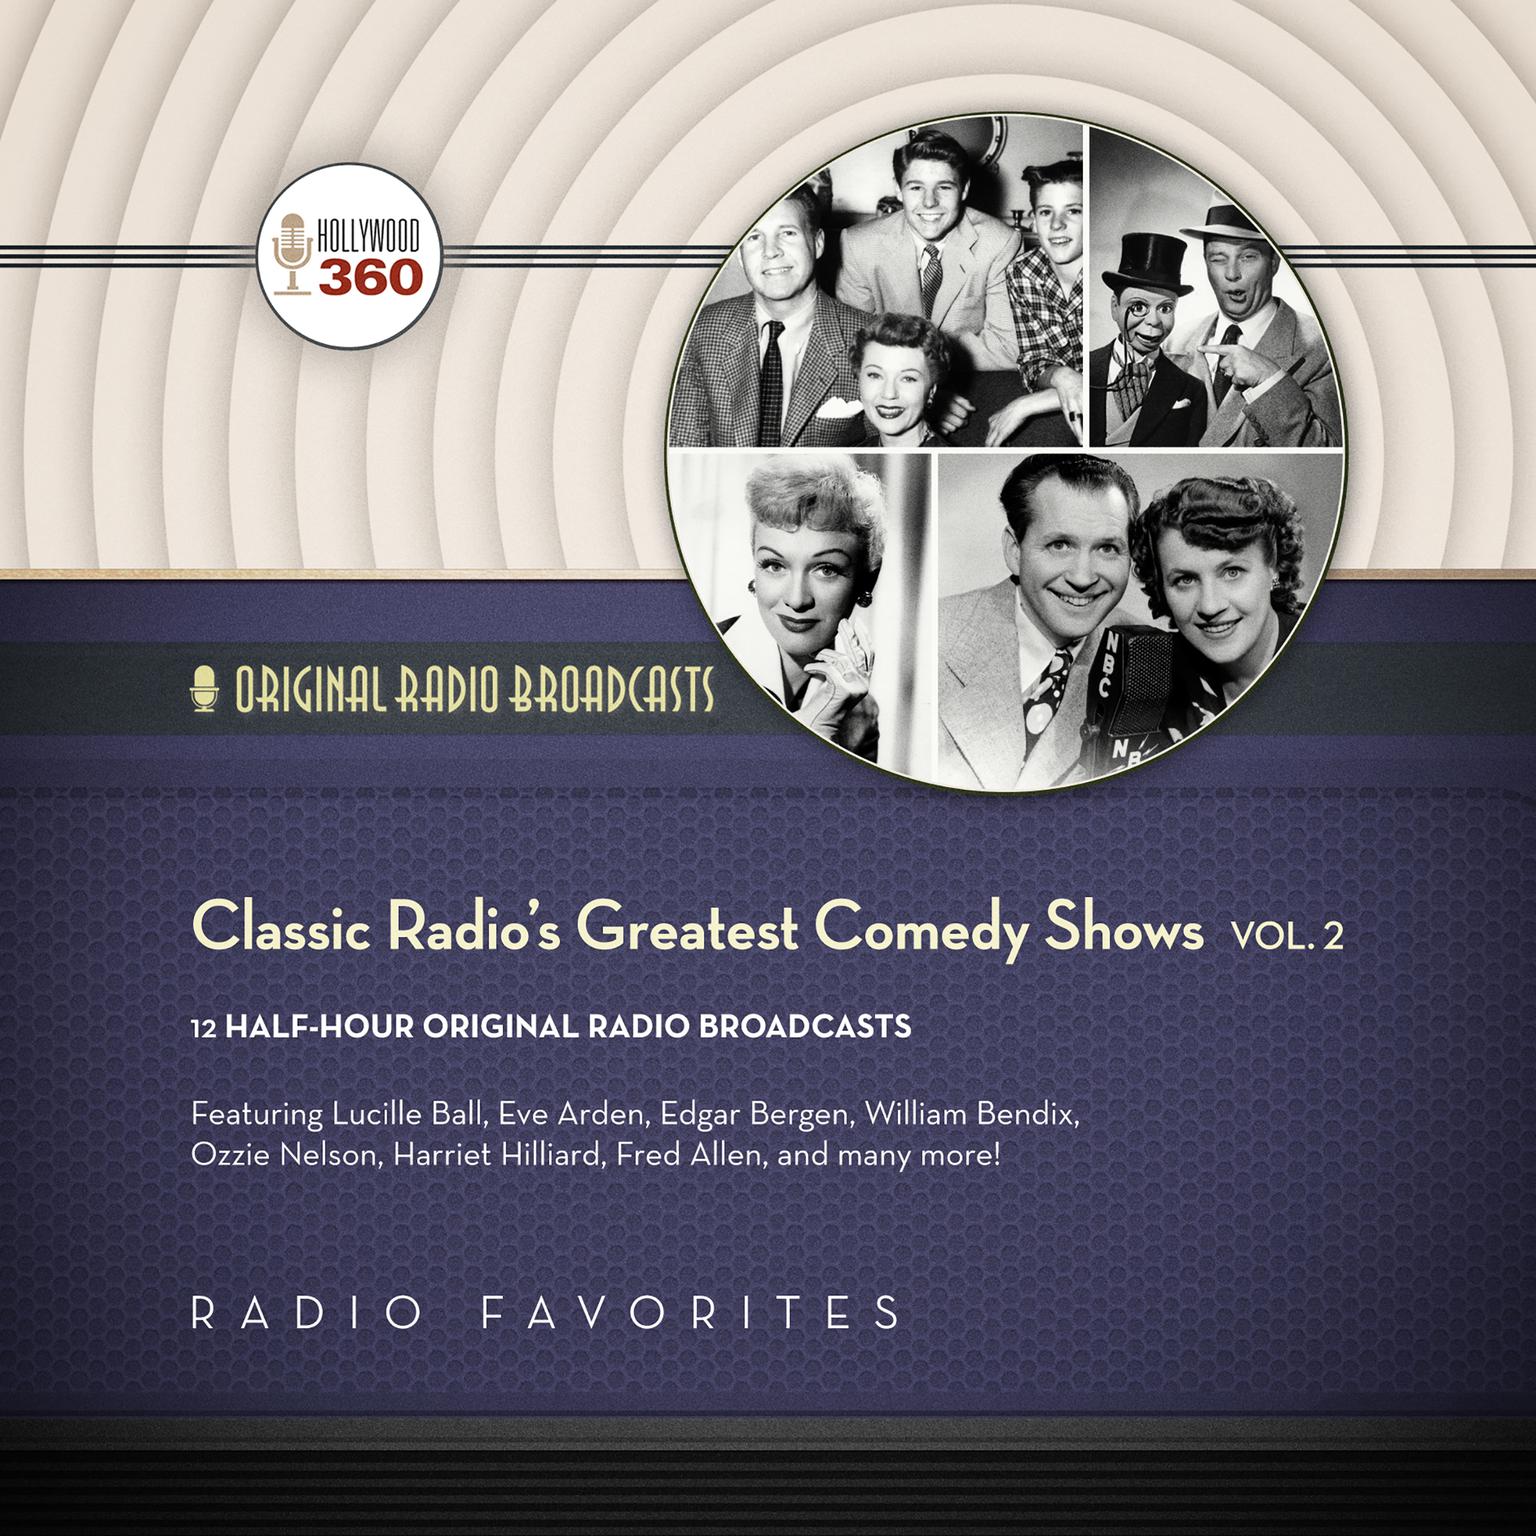 Classic Radio’s Greatest Comedy Shows, Vol. 2 Audiobook, by Hollywood 360